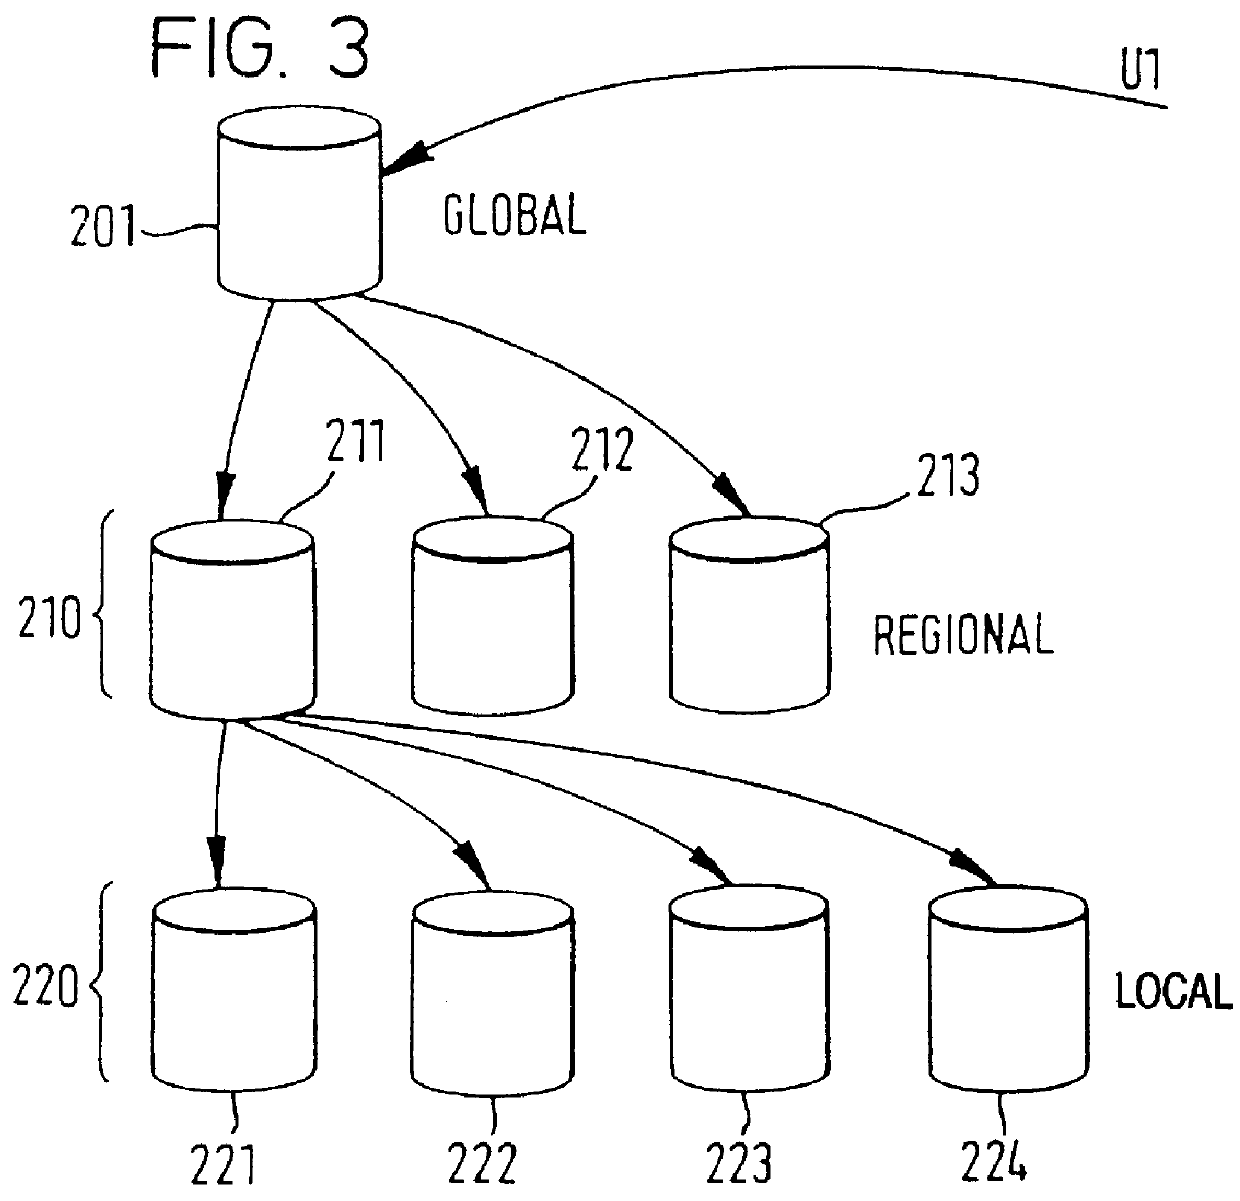 Telecommunications routing based on format of message